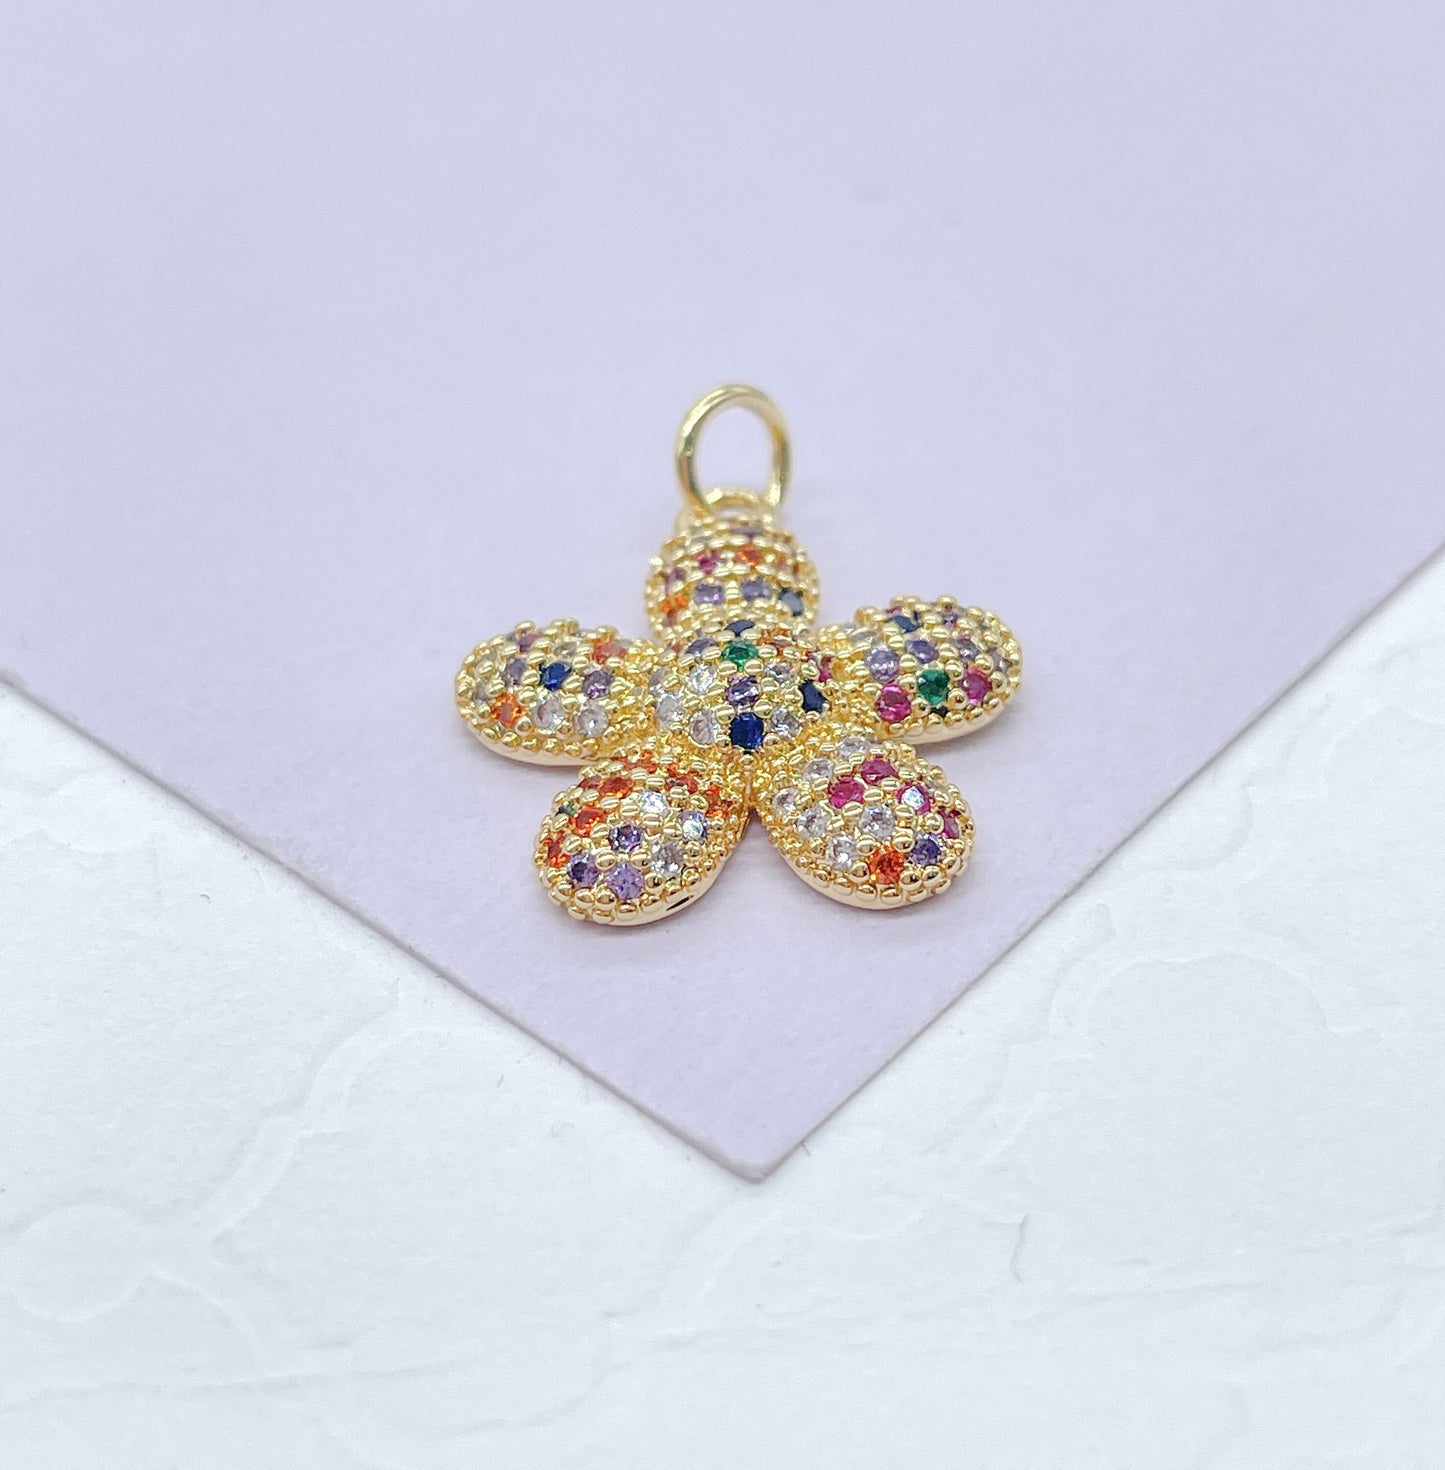 18k Gold Filled Tiny Chubby Colorful Pave Flower Charm For Jewlery Making